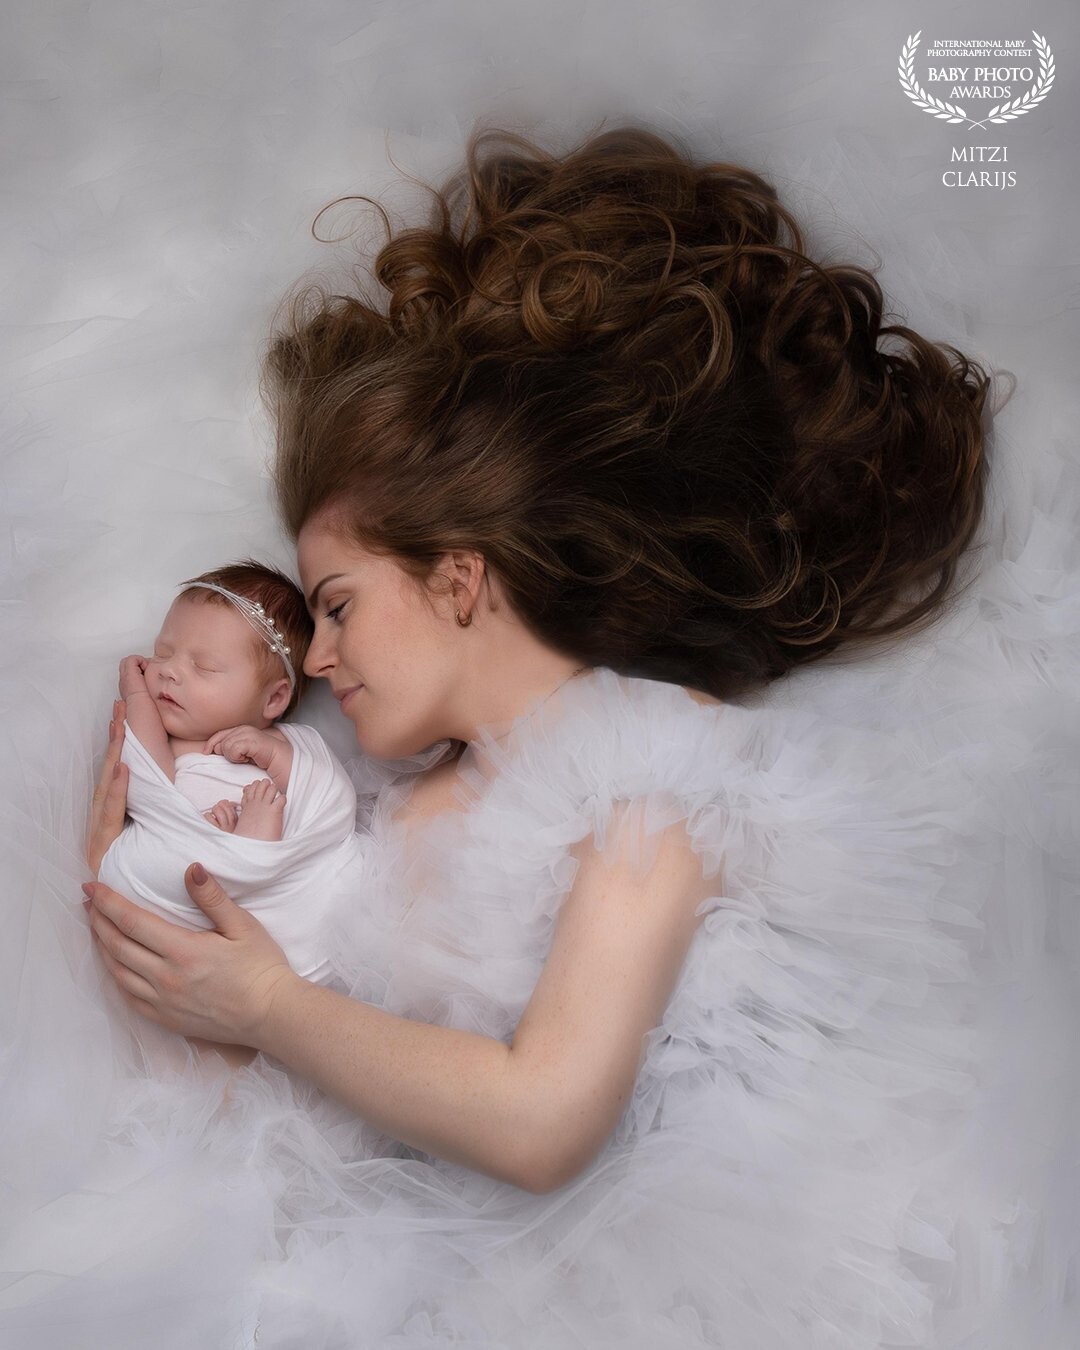 I believe this is such a powerful pose to show the unconditional motherlove. The connection between a newborn baby and mother is incredible, nature ensures that you are so well aligned to each other.